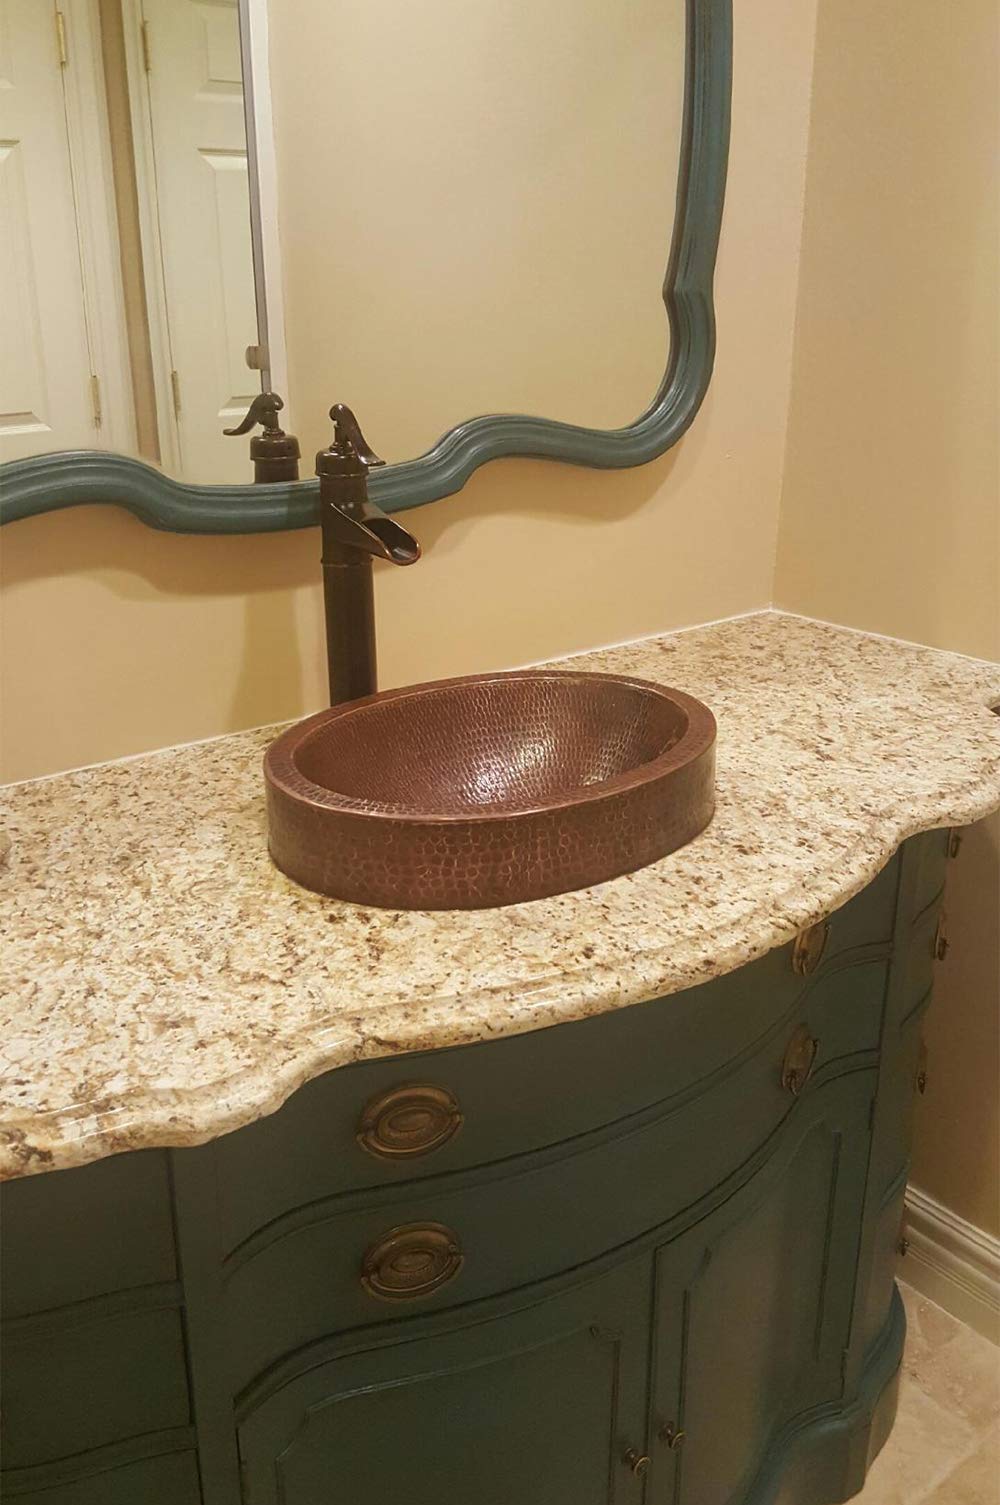 Premier Copper Products VO17SKDB Oval Skirted Vessel Hammered Copper Sink, Oil Rubbed Bronze